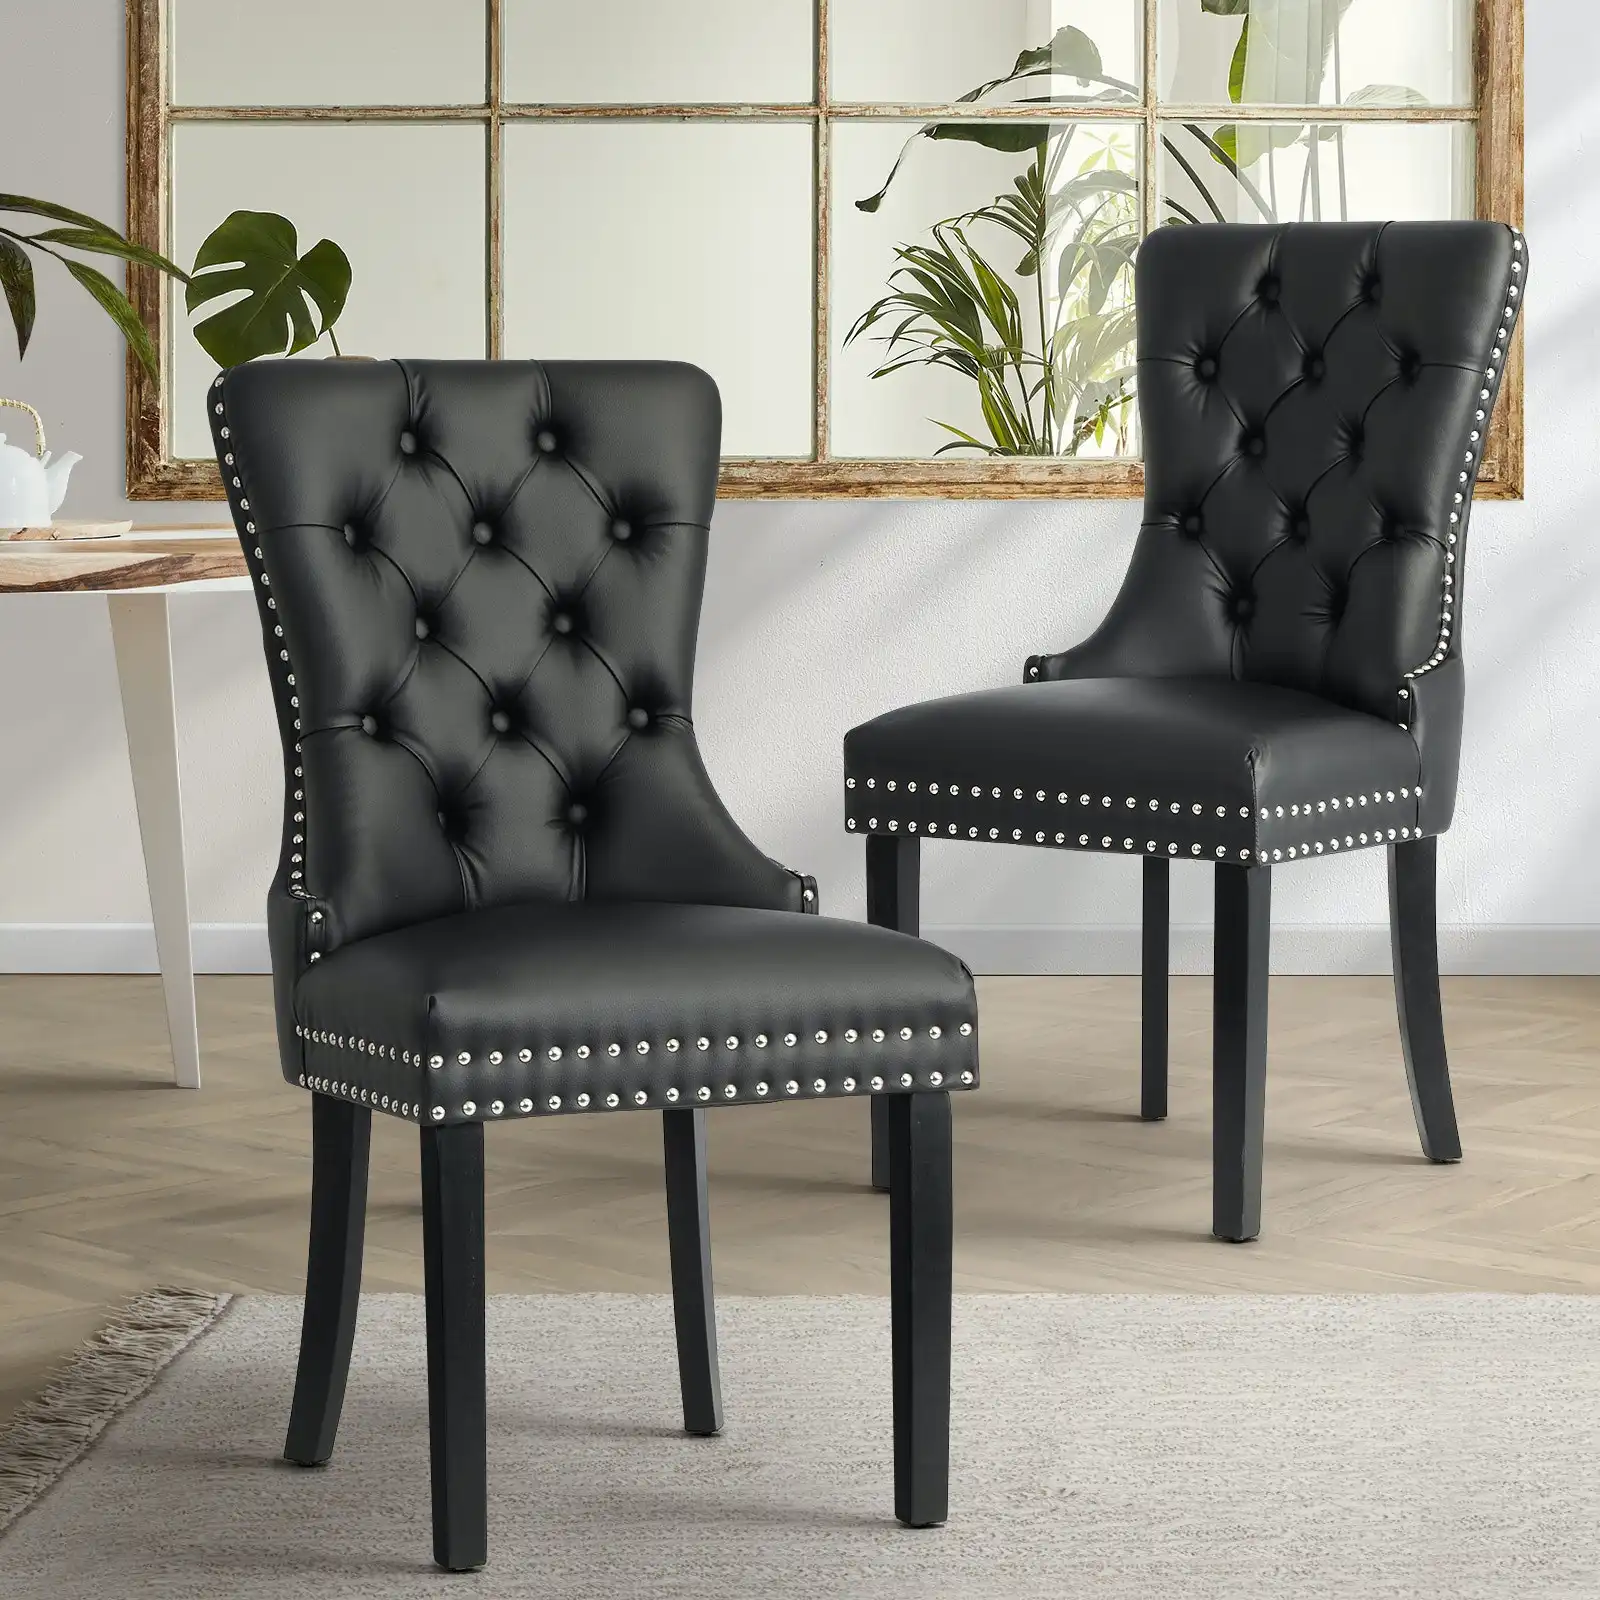 Oikiture 2x Dining Chairs Upholstered French Provincial Tufted PU Leather Black